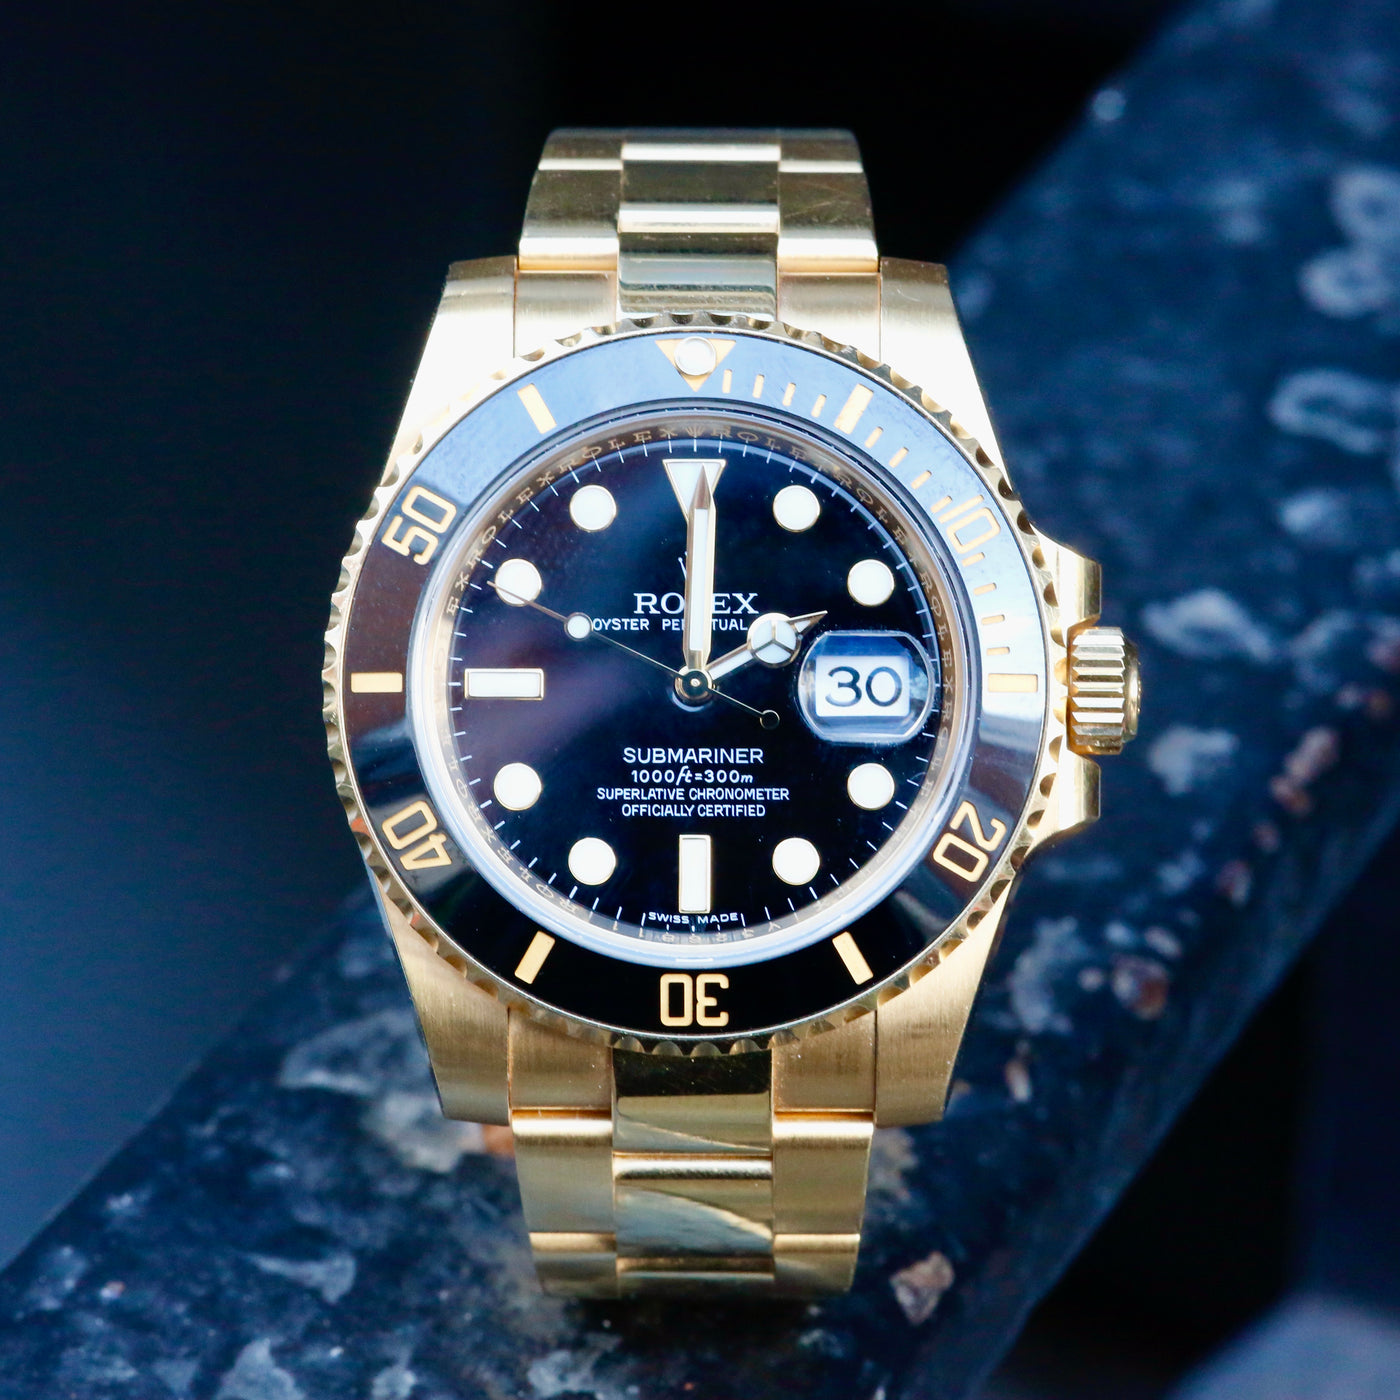 An Iconic Watch In The Rolex Range - The Submariner